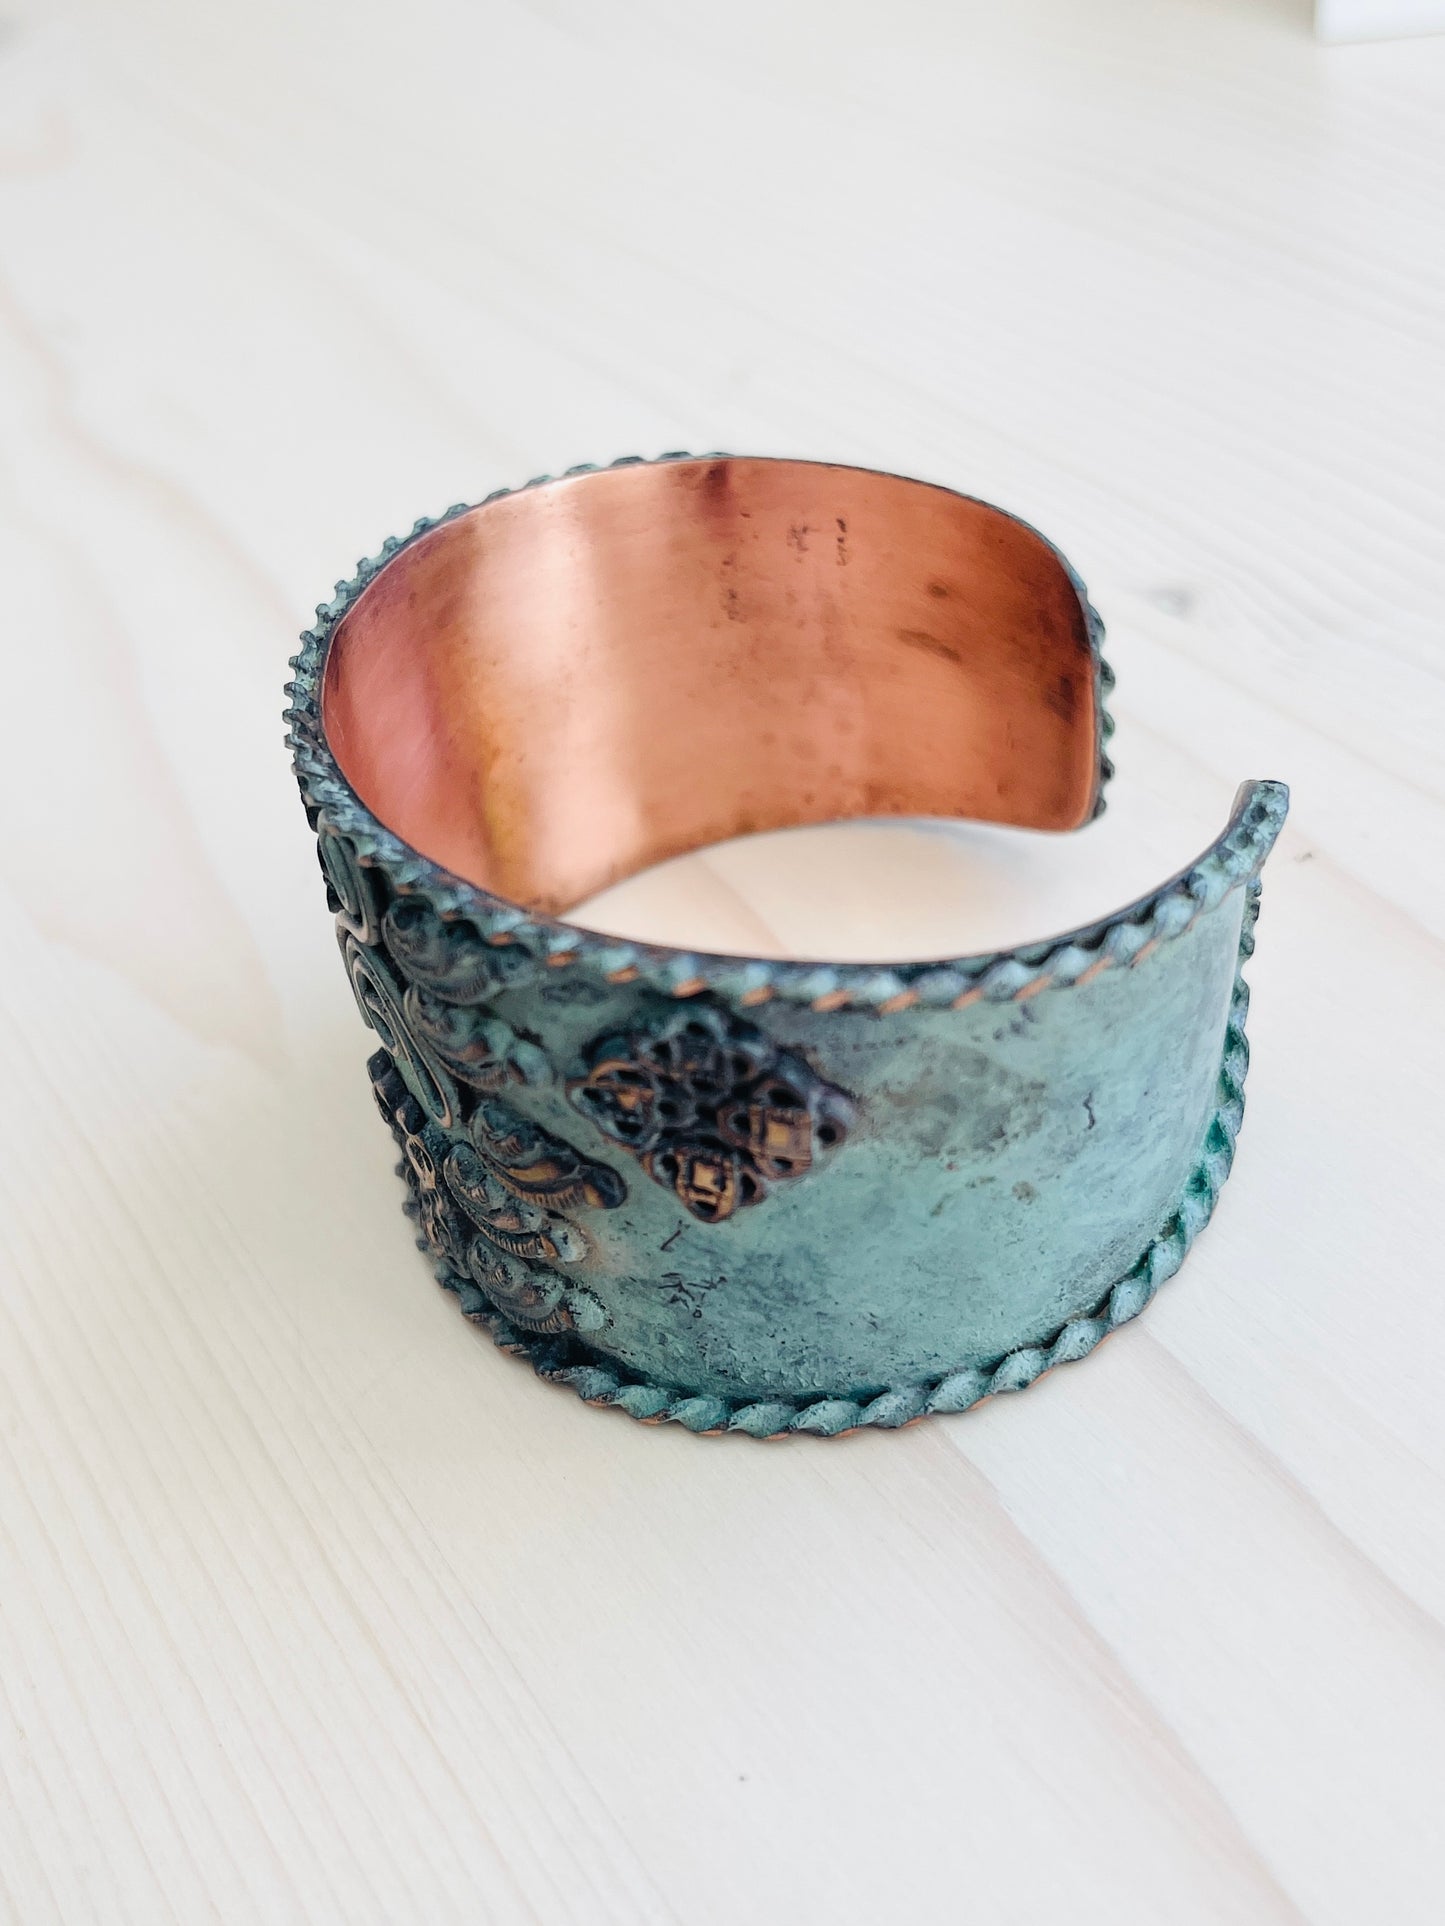 Handmade copper bracelet-cuff and designed with a beautiful pale aqua turquoise patina finish